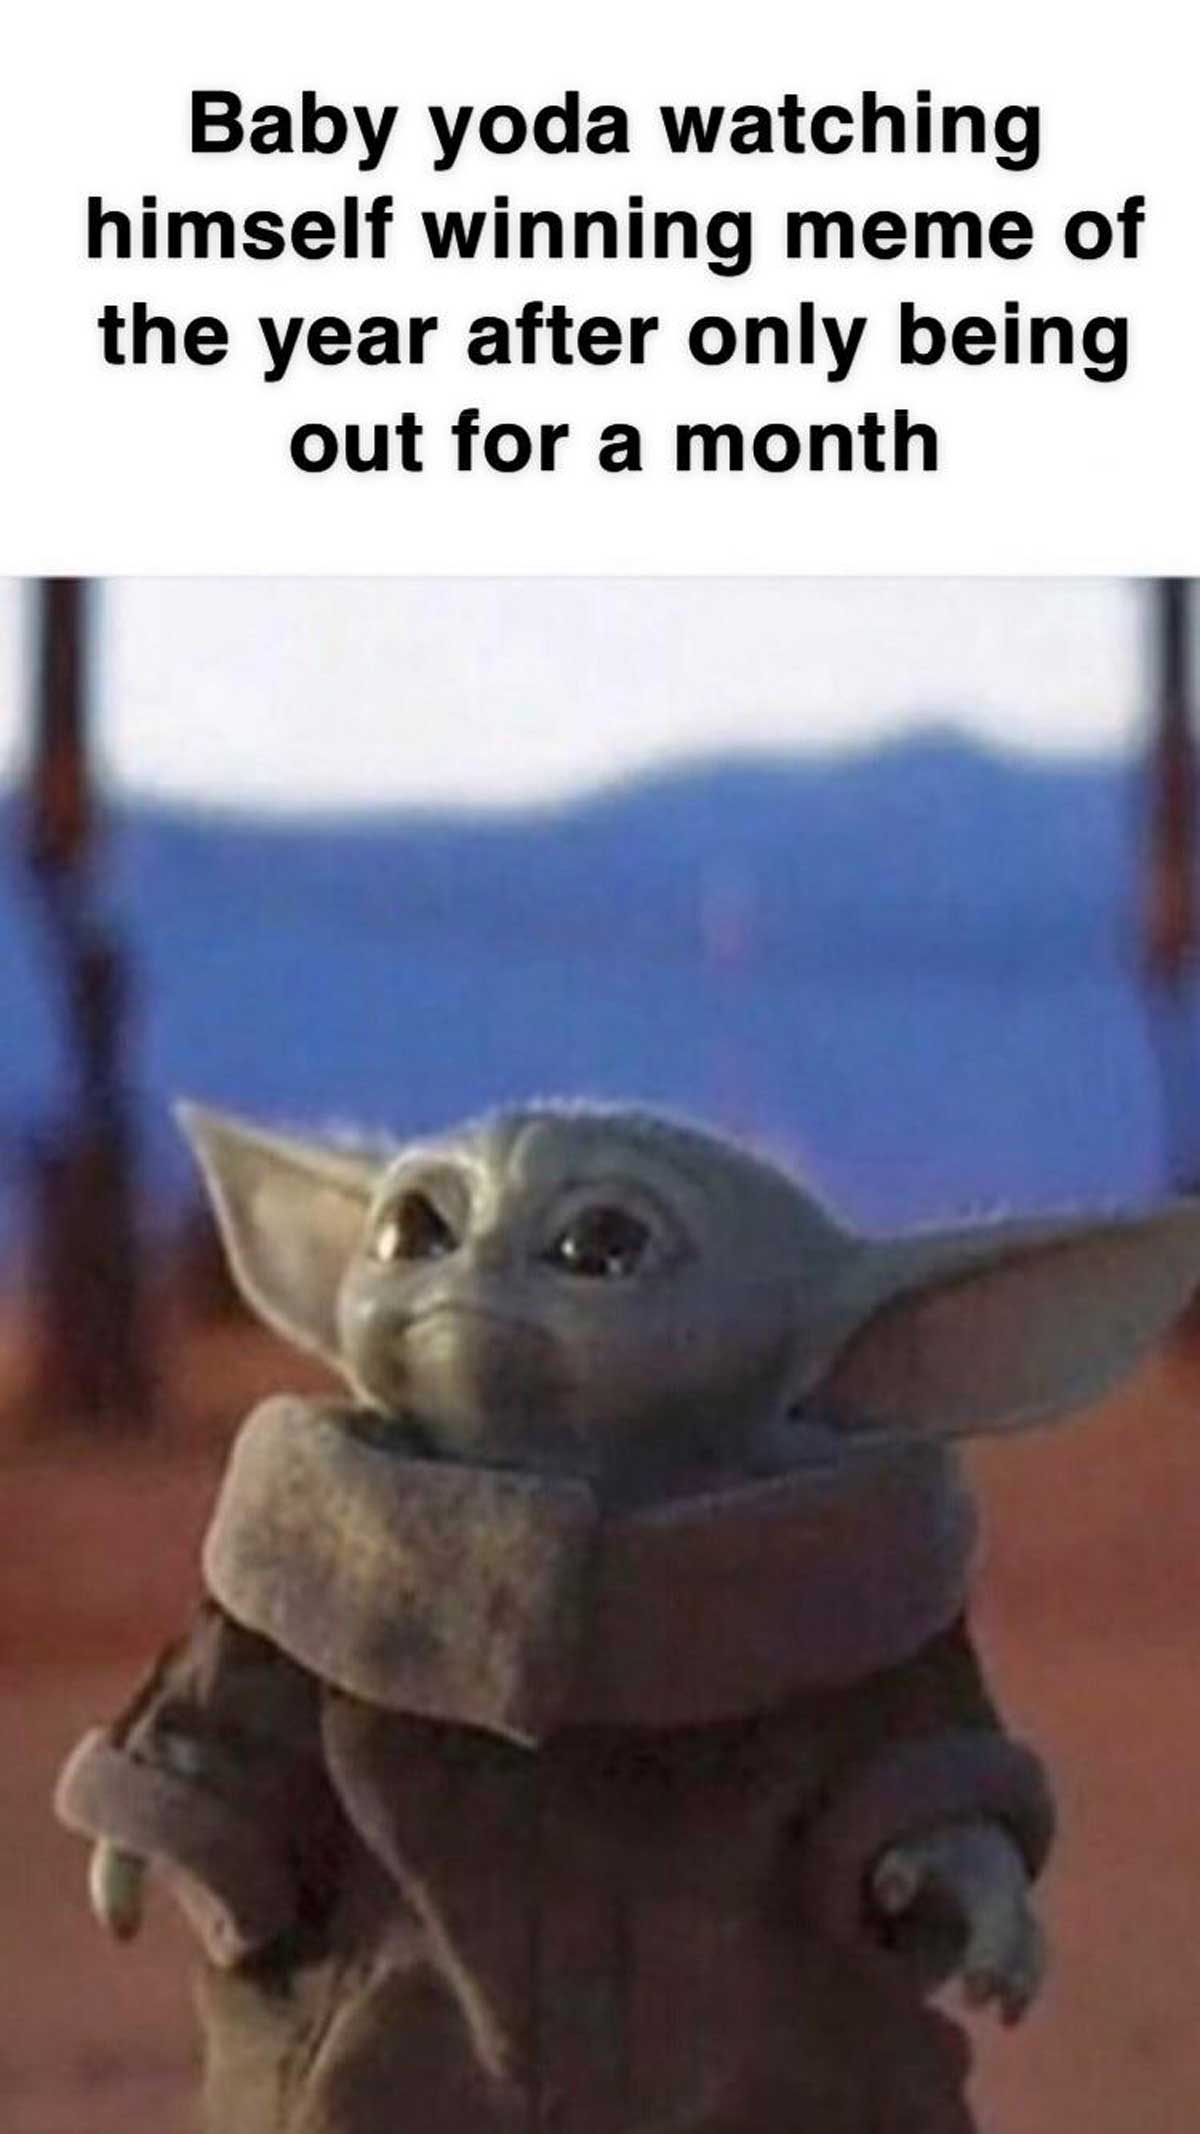 photo caption - Baby yoda watching himself winning meme of the year after only being out for a month